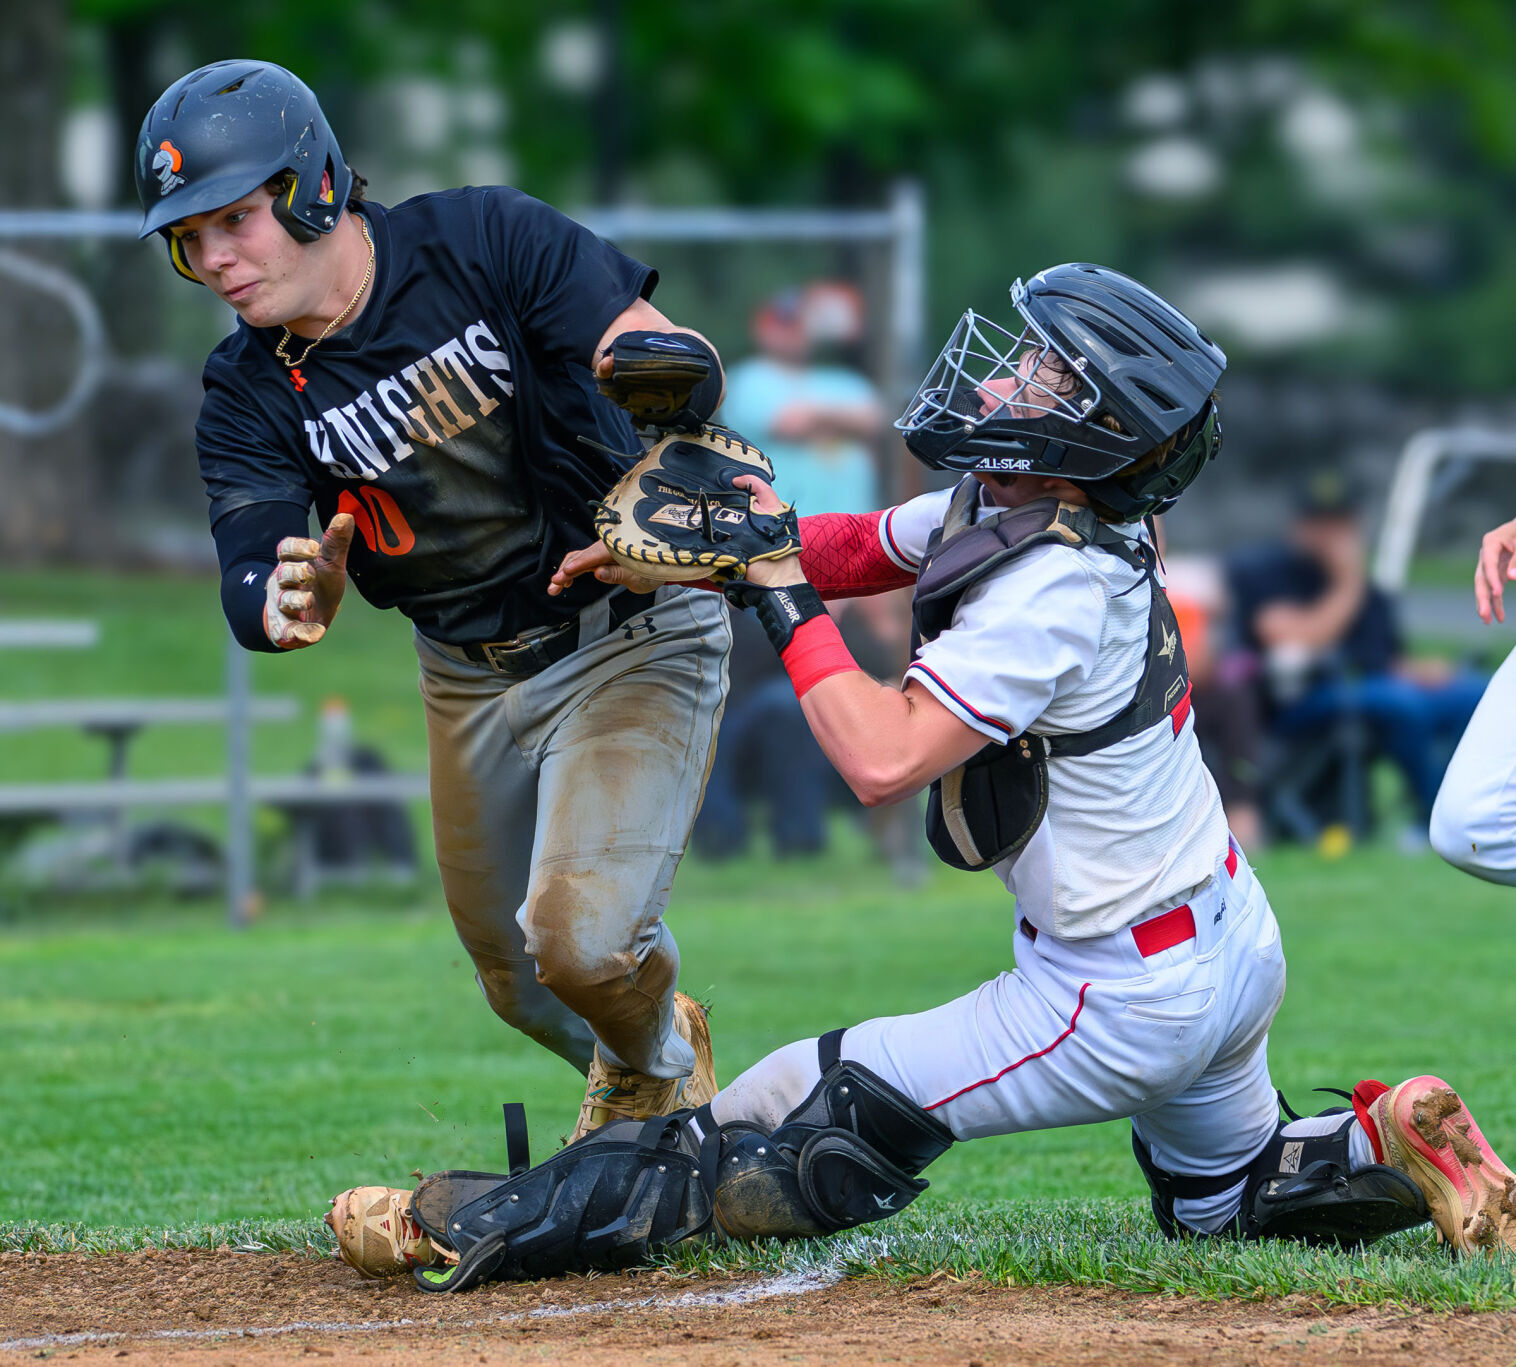 TJ baseball pieces together win over Middletown